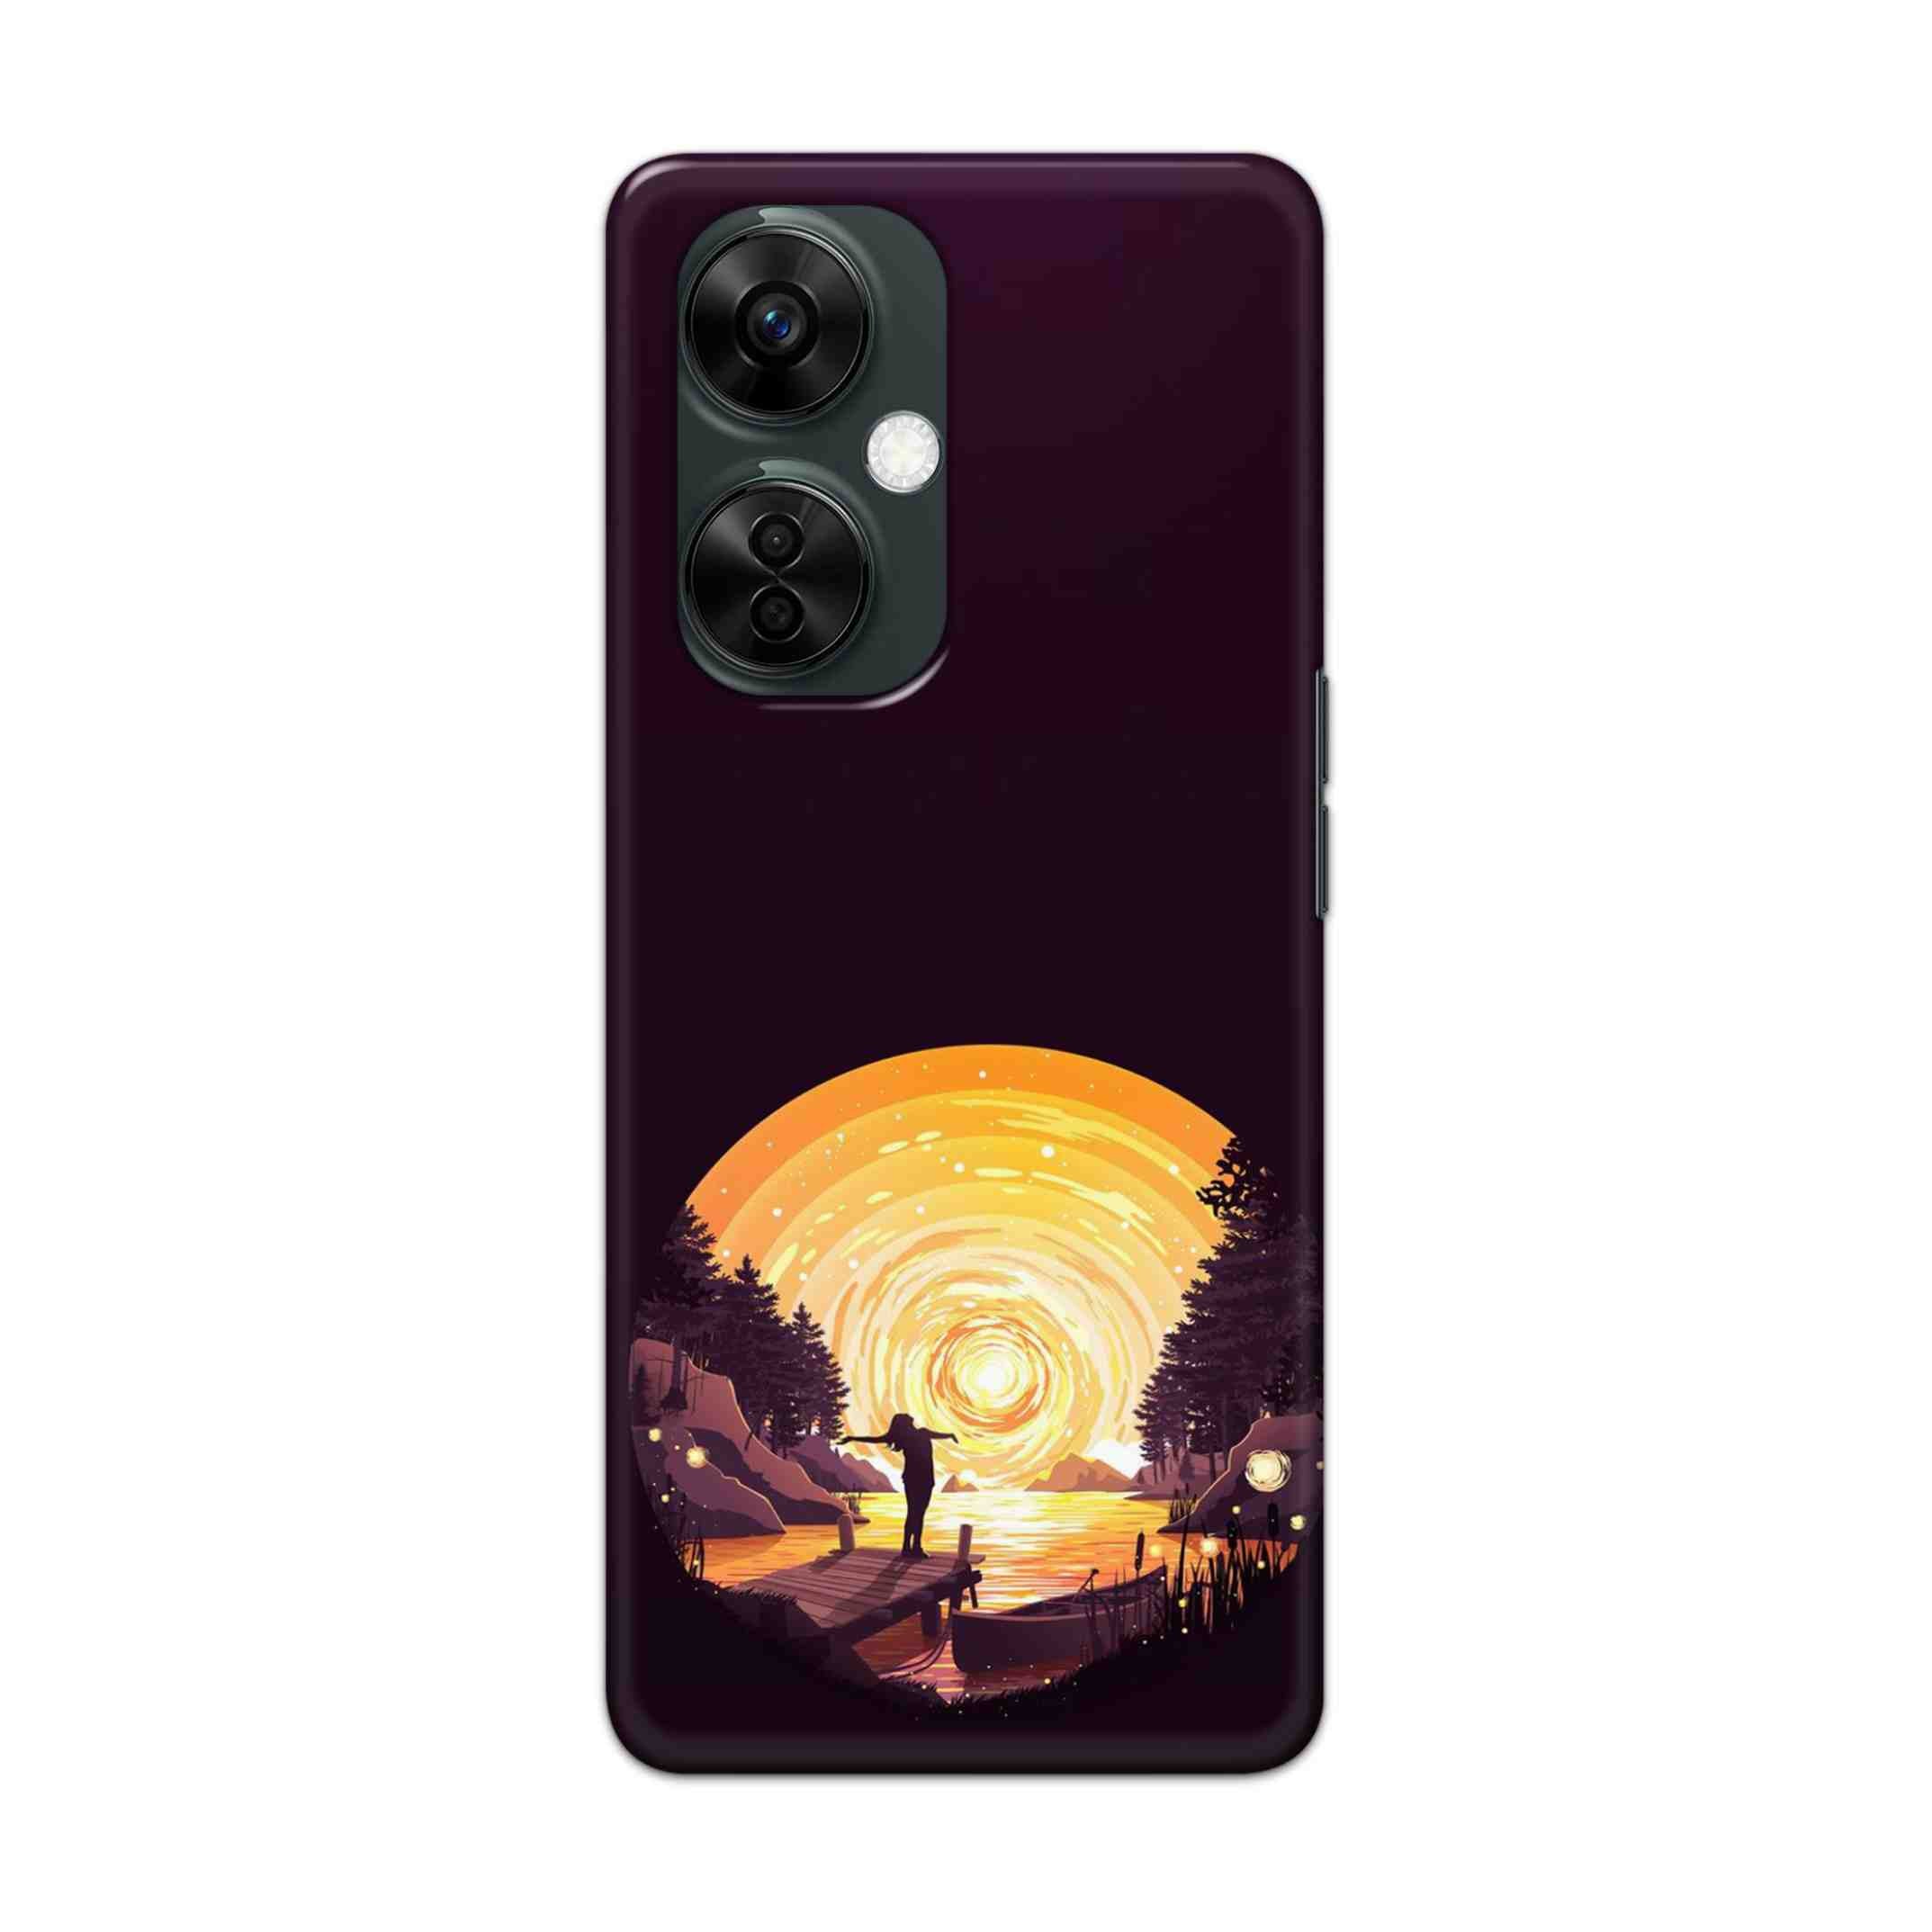 Buy Night Sunrise Hard Back Mobile Phone Case Cover For Oneplus Nord CE 3 Lite Online